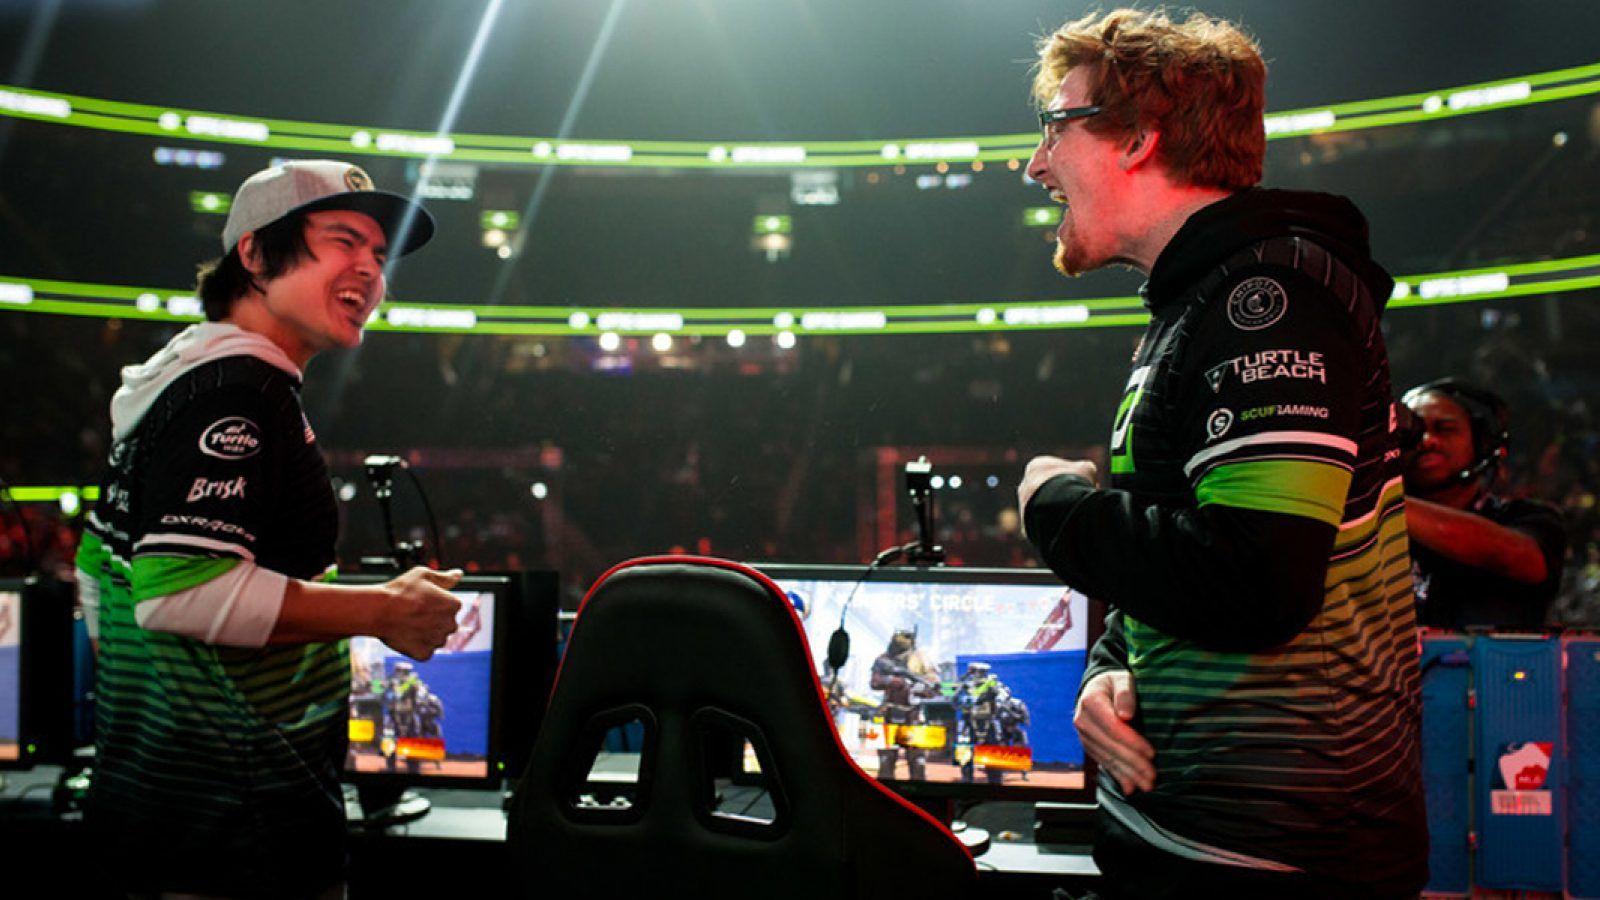 T2P Call of Duty duo Scump and Formal